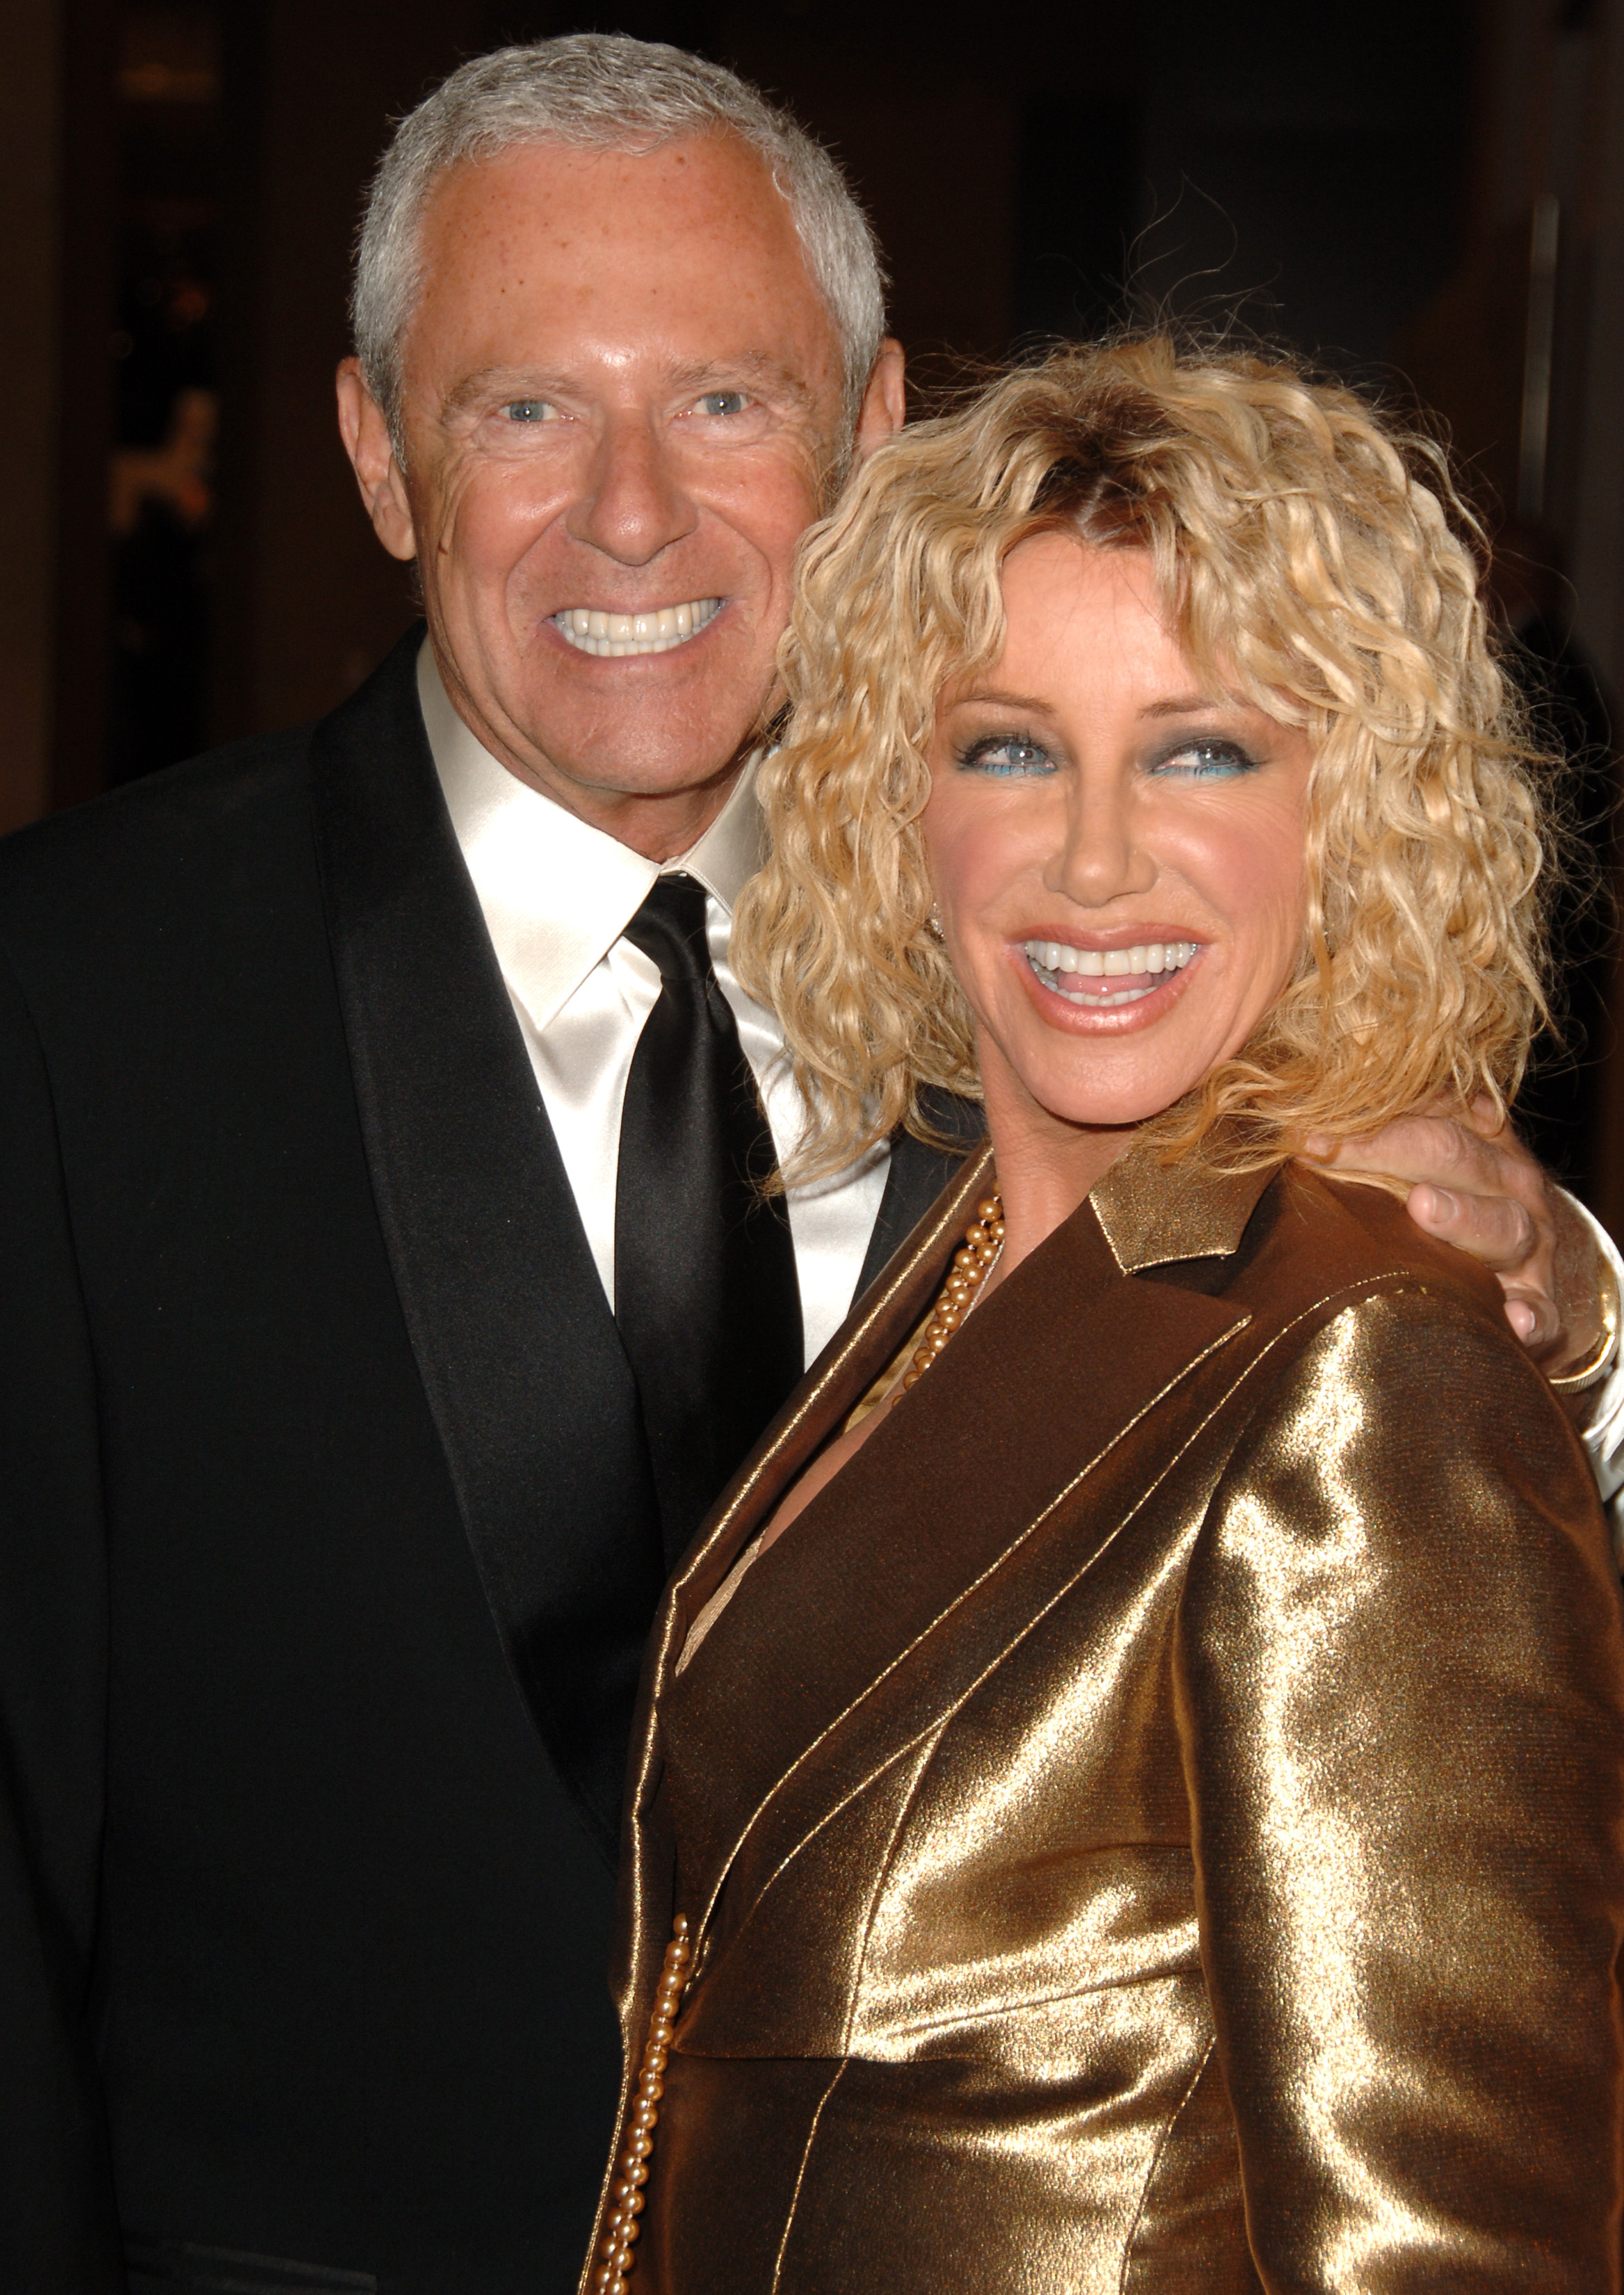 Alan Hamel and Suzanne Somers at the Mercedes-Benz Presents the 17th Carousel of Hope Ball | Source: Getty Images